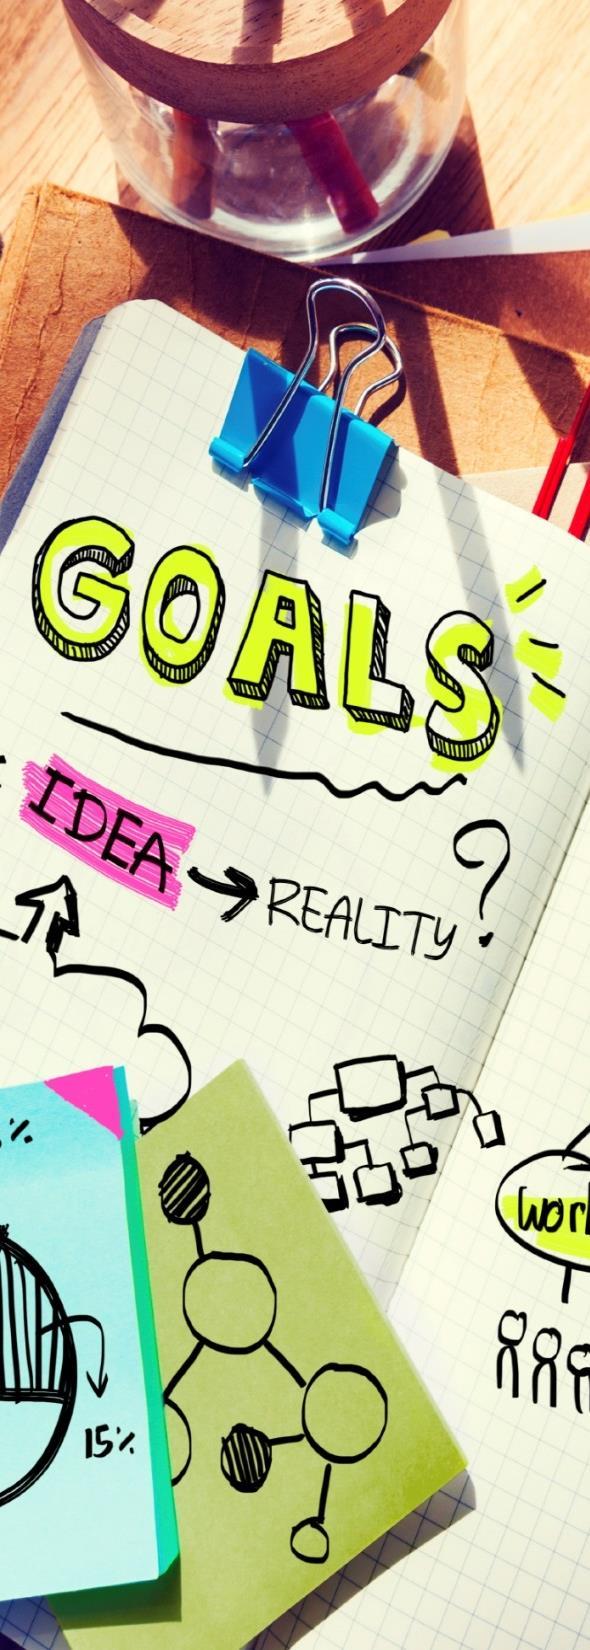 Goals Identify WHAT results an organization wants to achieve Help organizations define their purpose and structure their